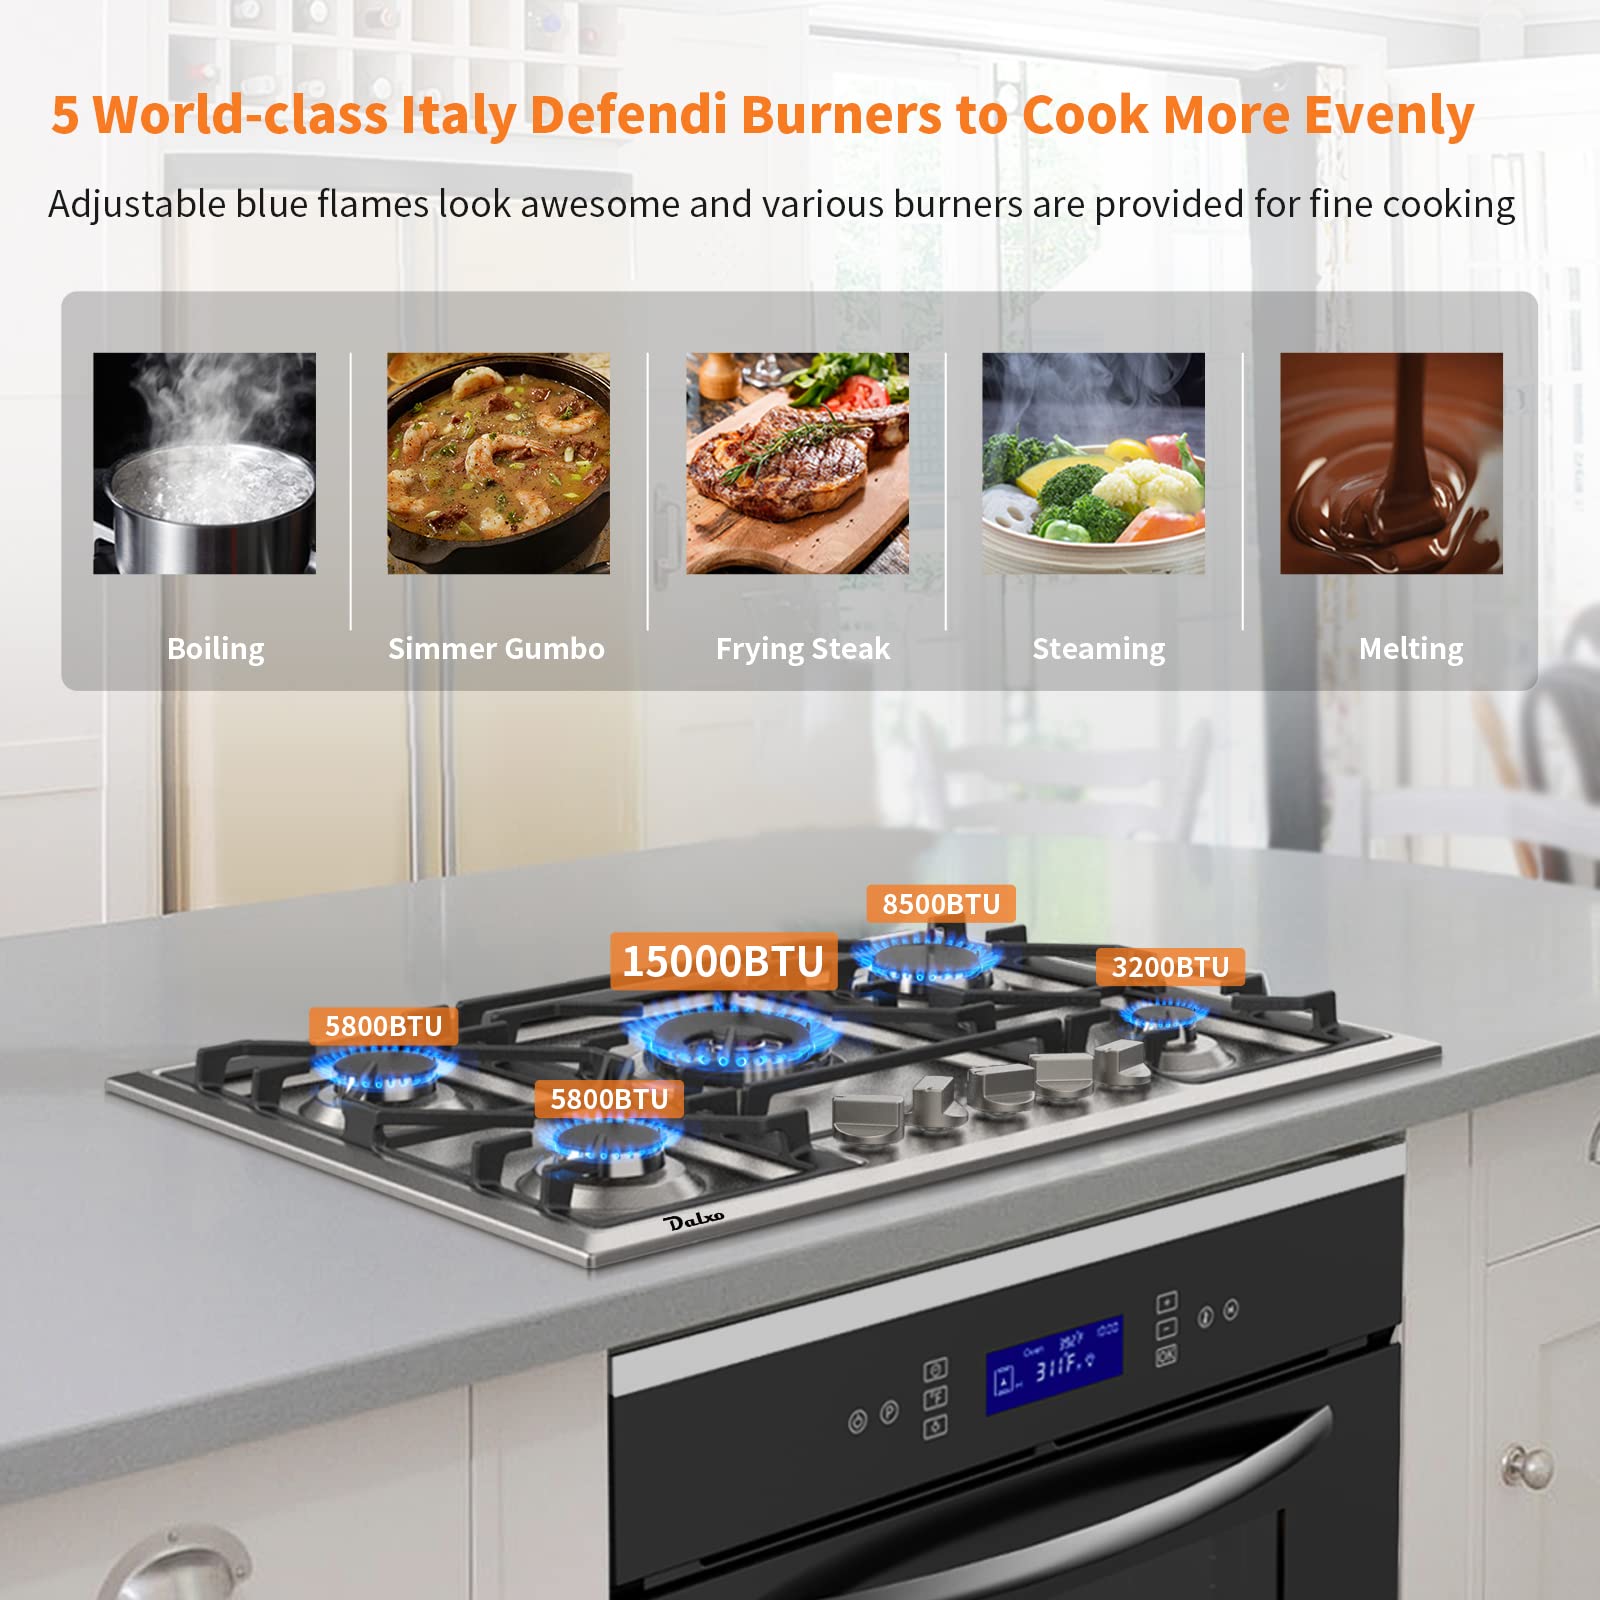 30 Inch Gas Cooktop with 6 Metal Knob, Dalxo 5 Italy Defendi Burner Gas Stovetop, Food-grade Stainless Steel Built-In Gas Hob, NG/LPG Convertible Gas Range Top for Kitchen, Thermocouple Protection